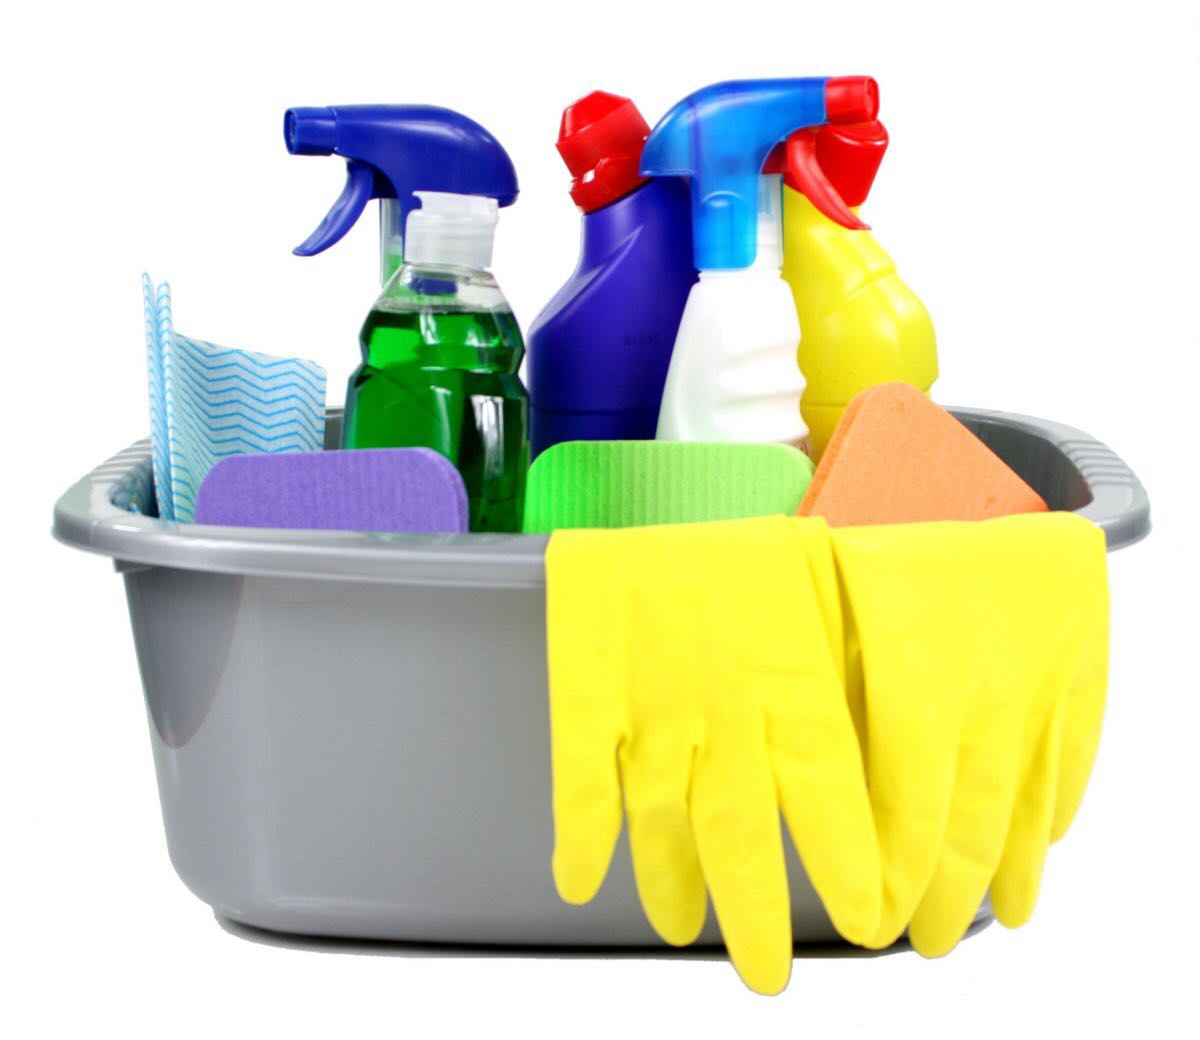 Basic supplies for general cleaning services